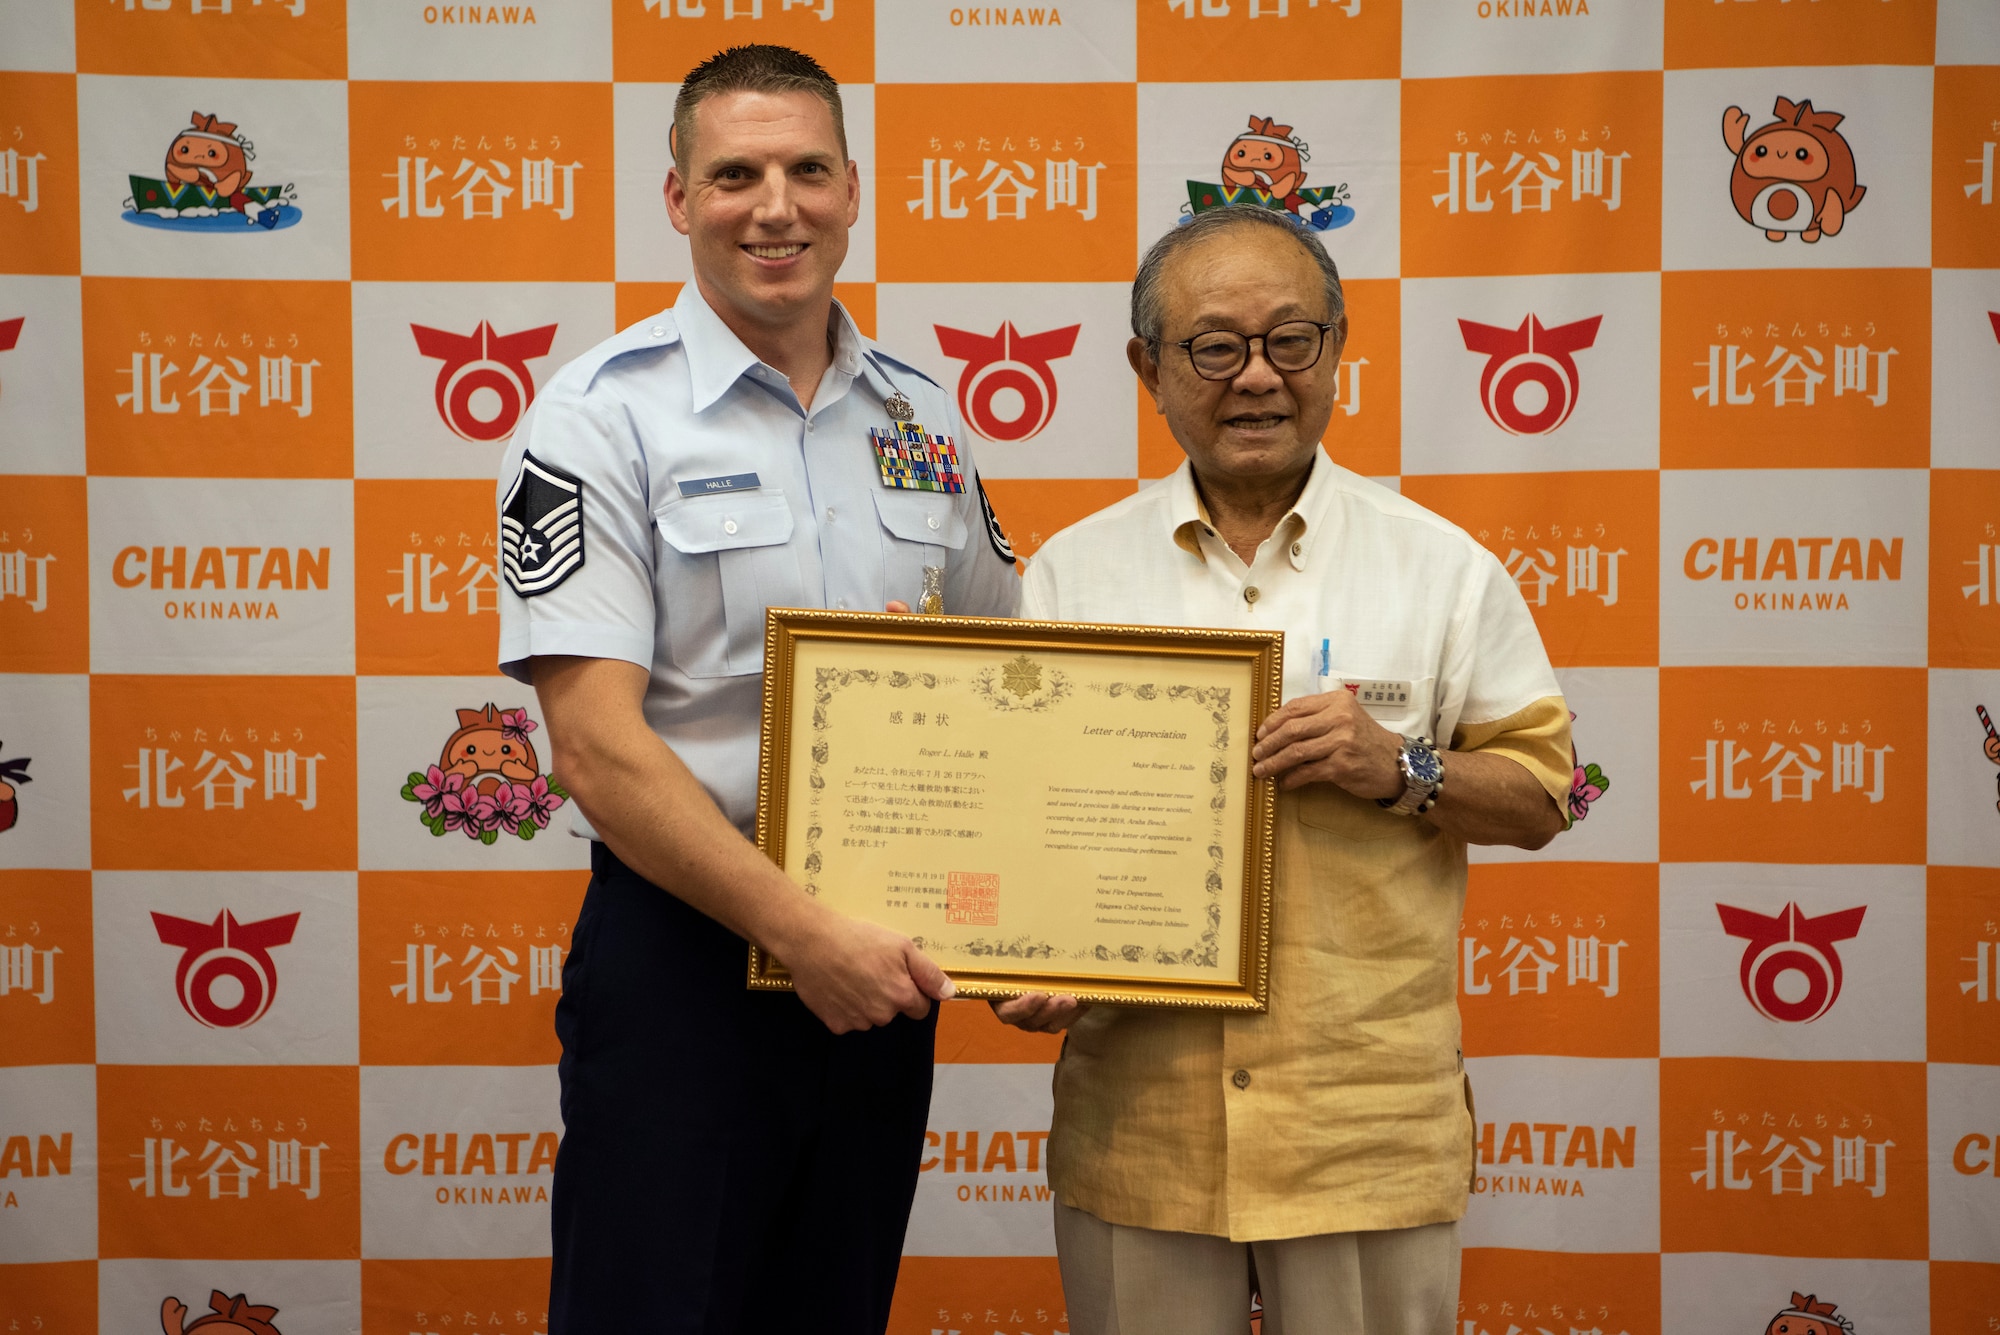 Two men smile and hold up a framed certificate.